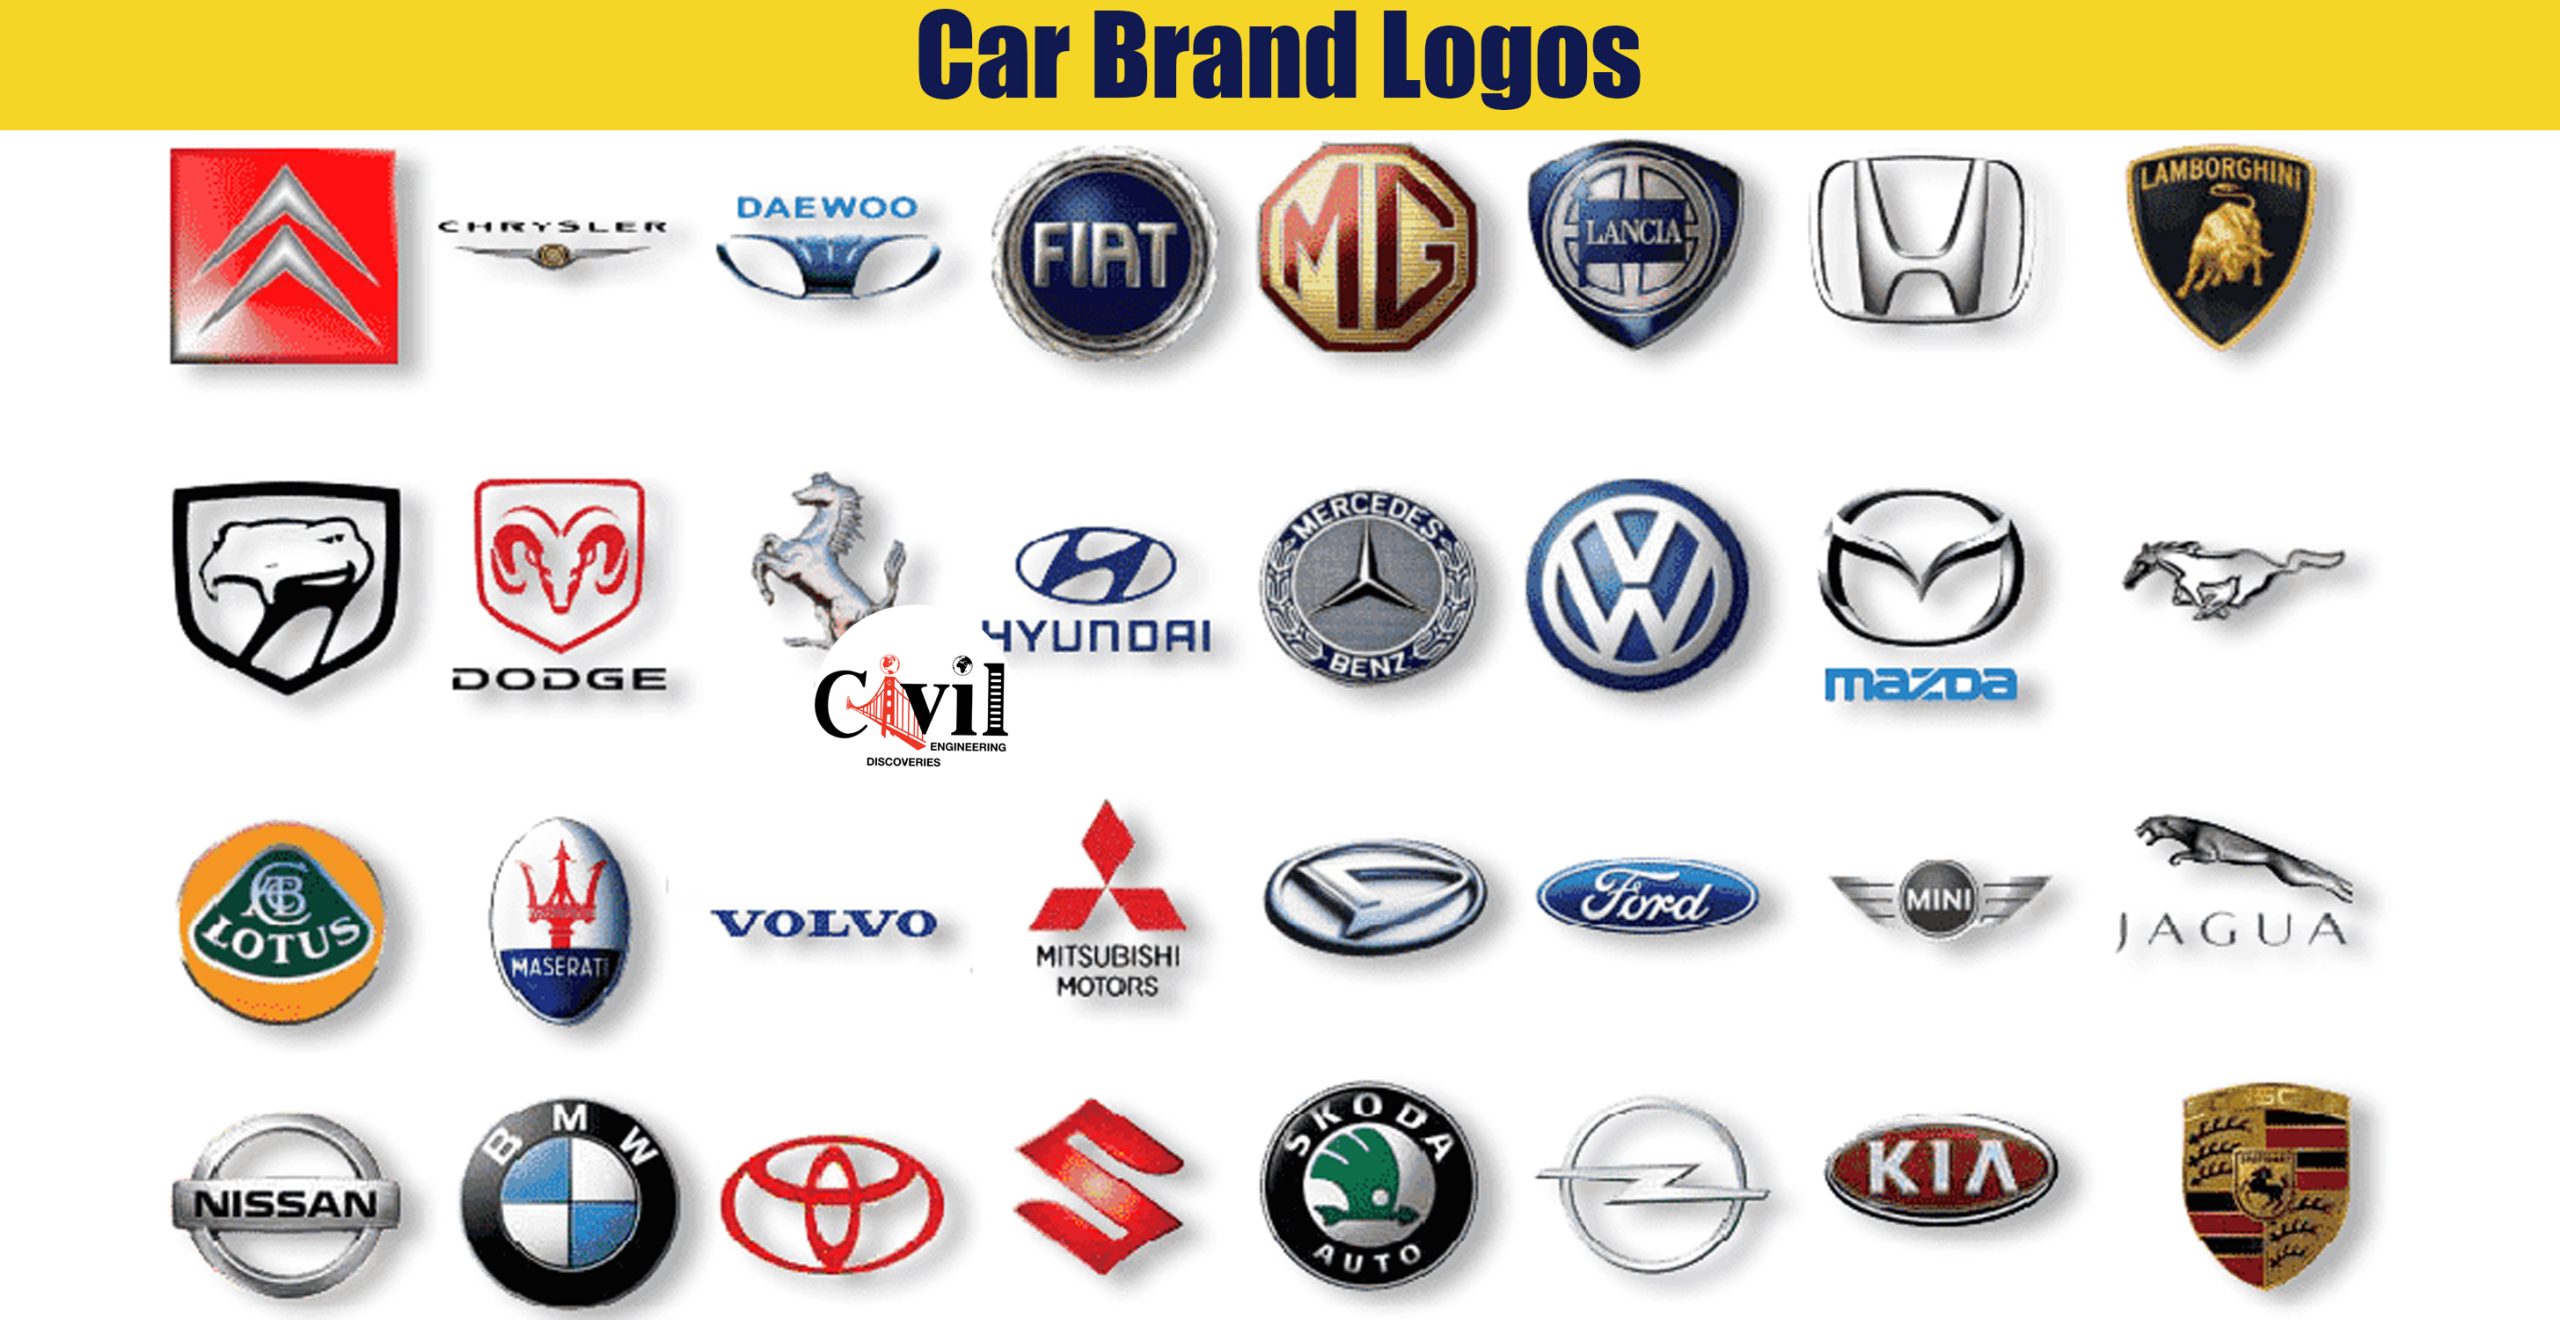 Car Brands  Car brands logos, Car brands, Car logos with names